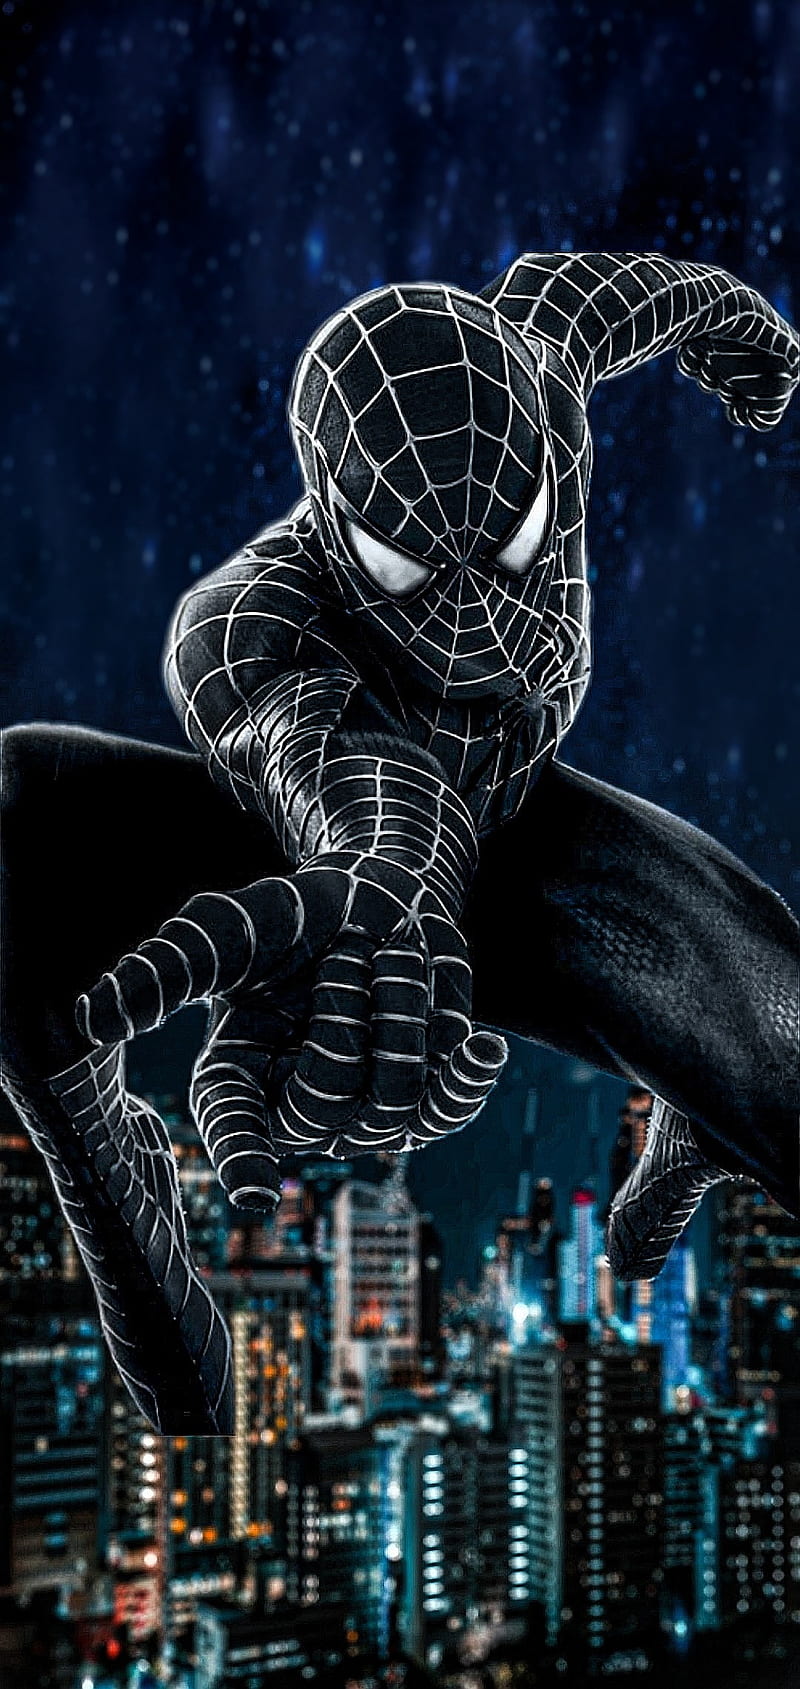 Top 999+ black spiderman images – Amazing Collection black spiderman images Full 4K